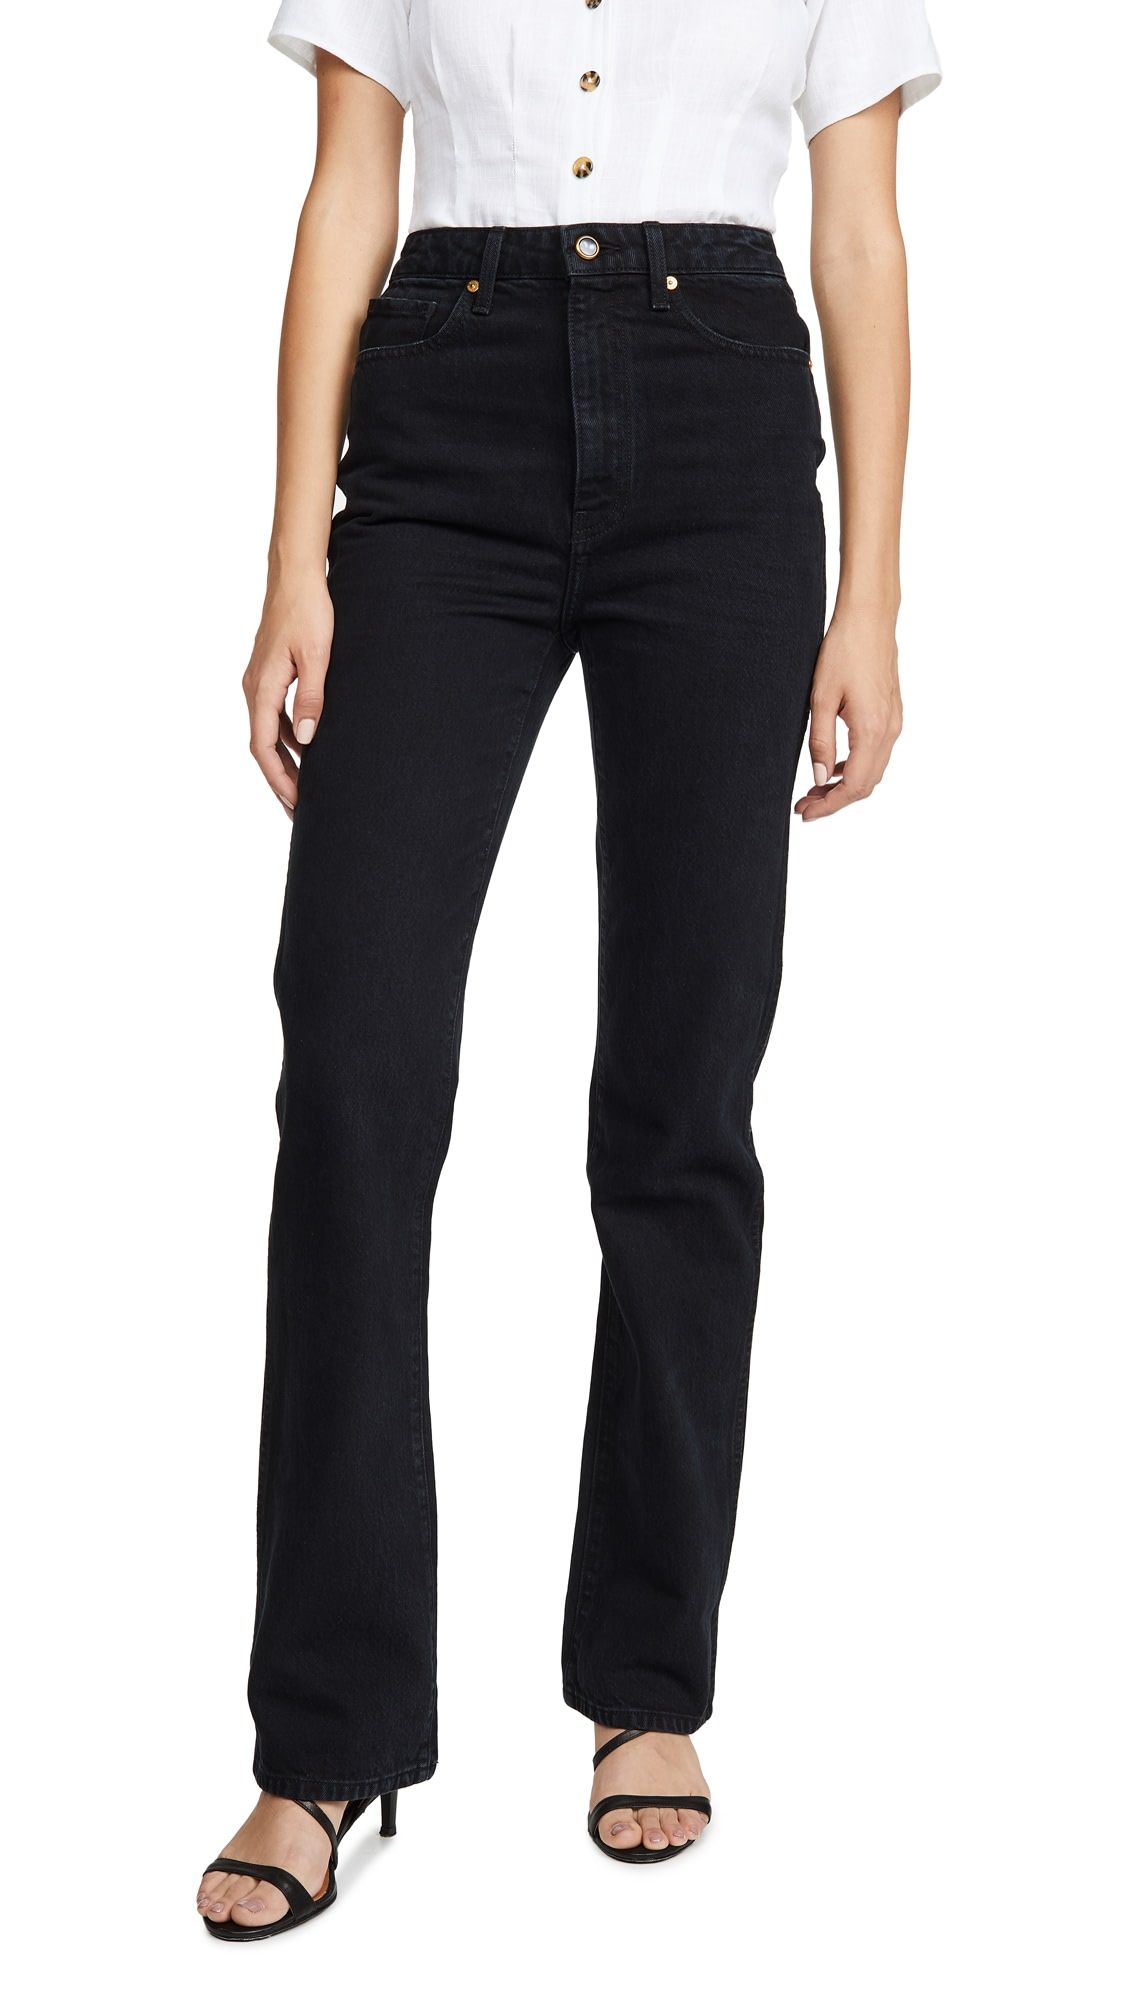 Danielle Stovepipe Jeans | Shopbop